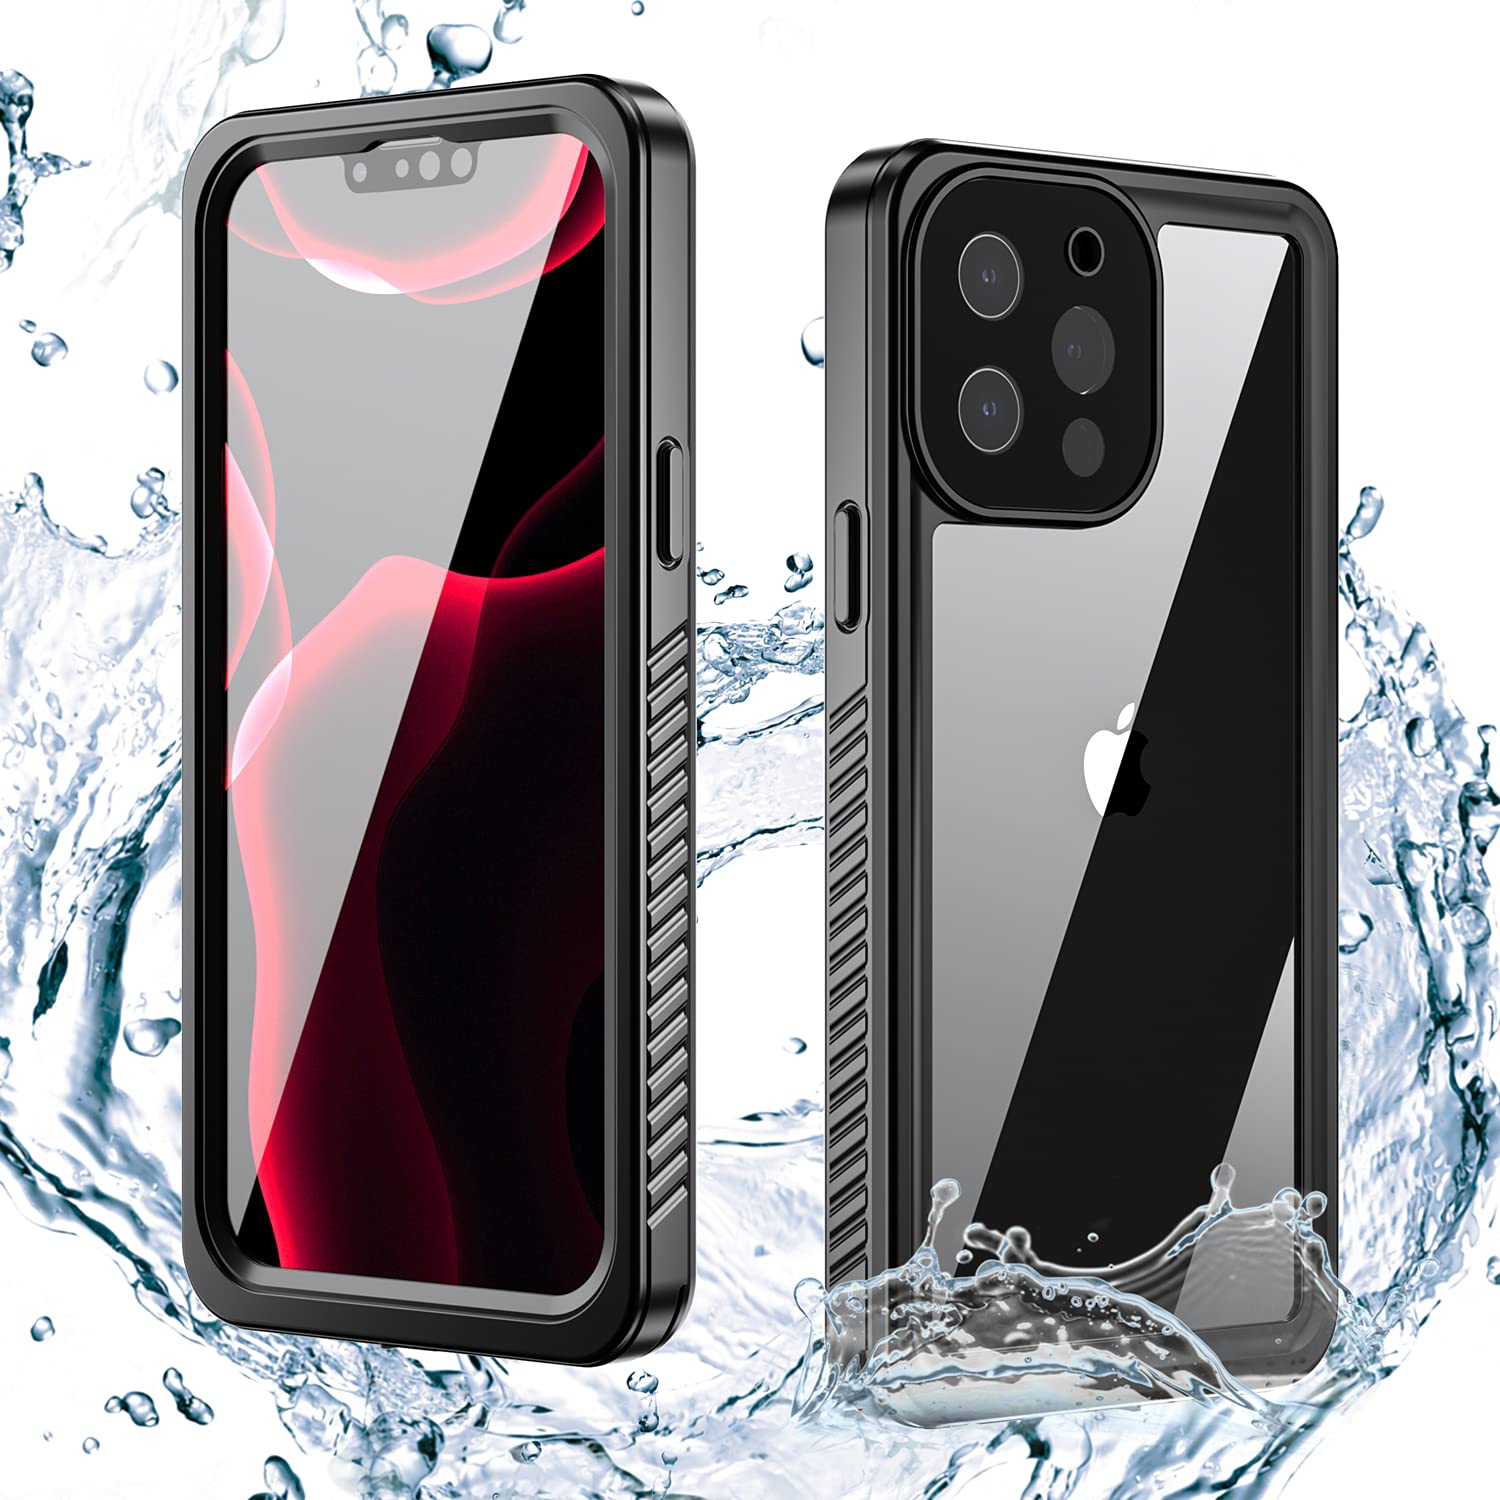 Waterproof Case for iPhone 13 Pro Max, DINGXIN Shockproof Dirt-Proof Snow-Proof Cover Full-Body Protective Built-in Screen P